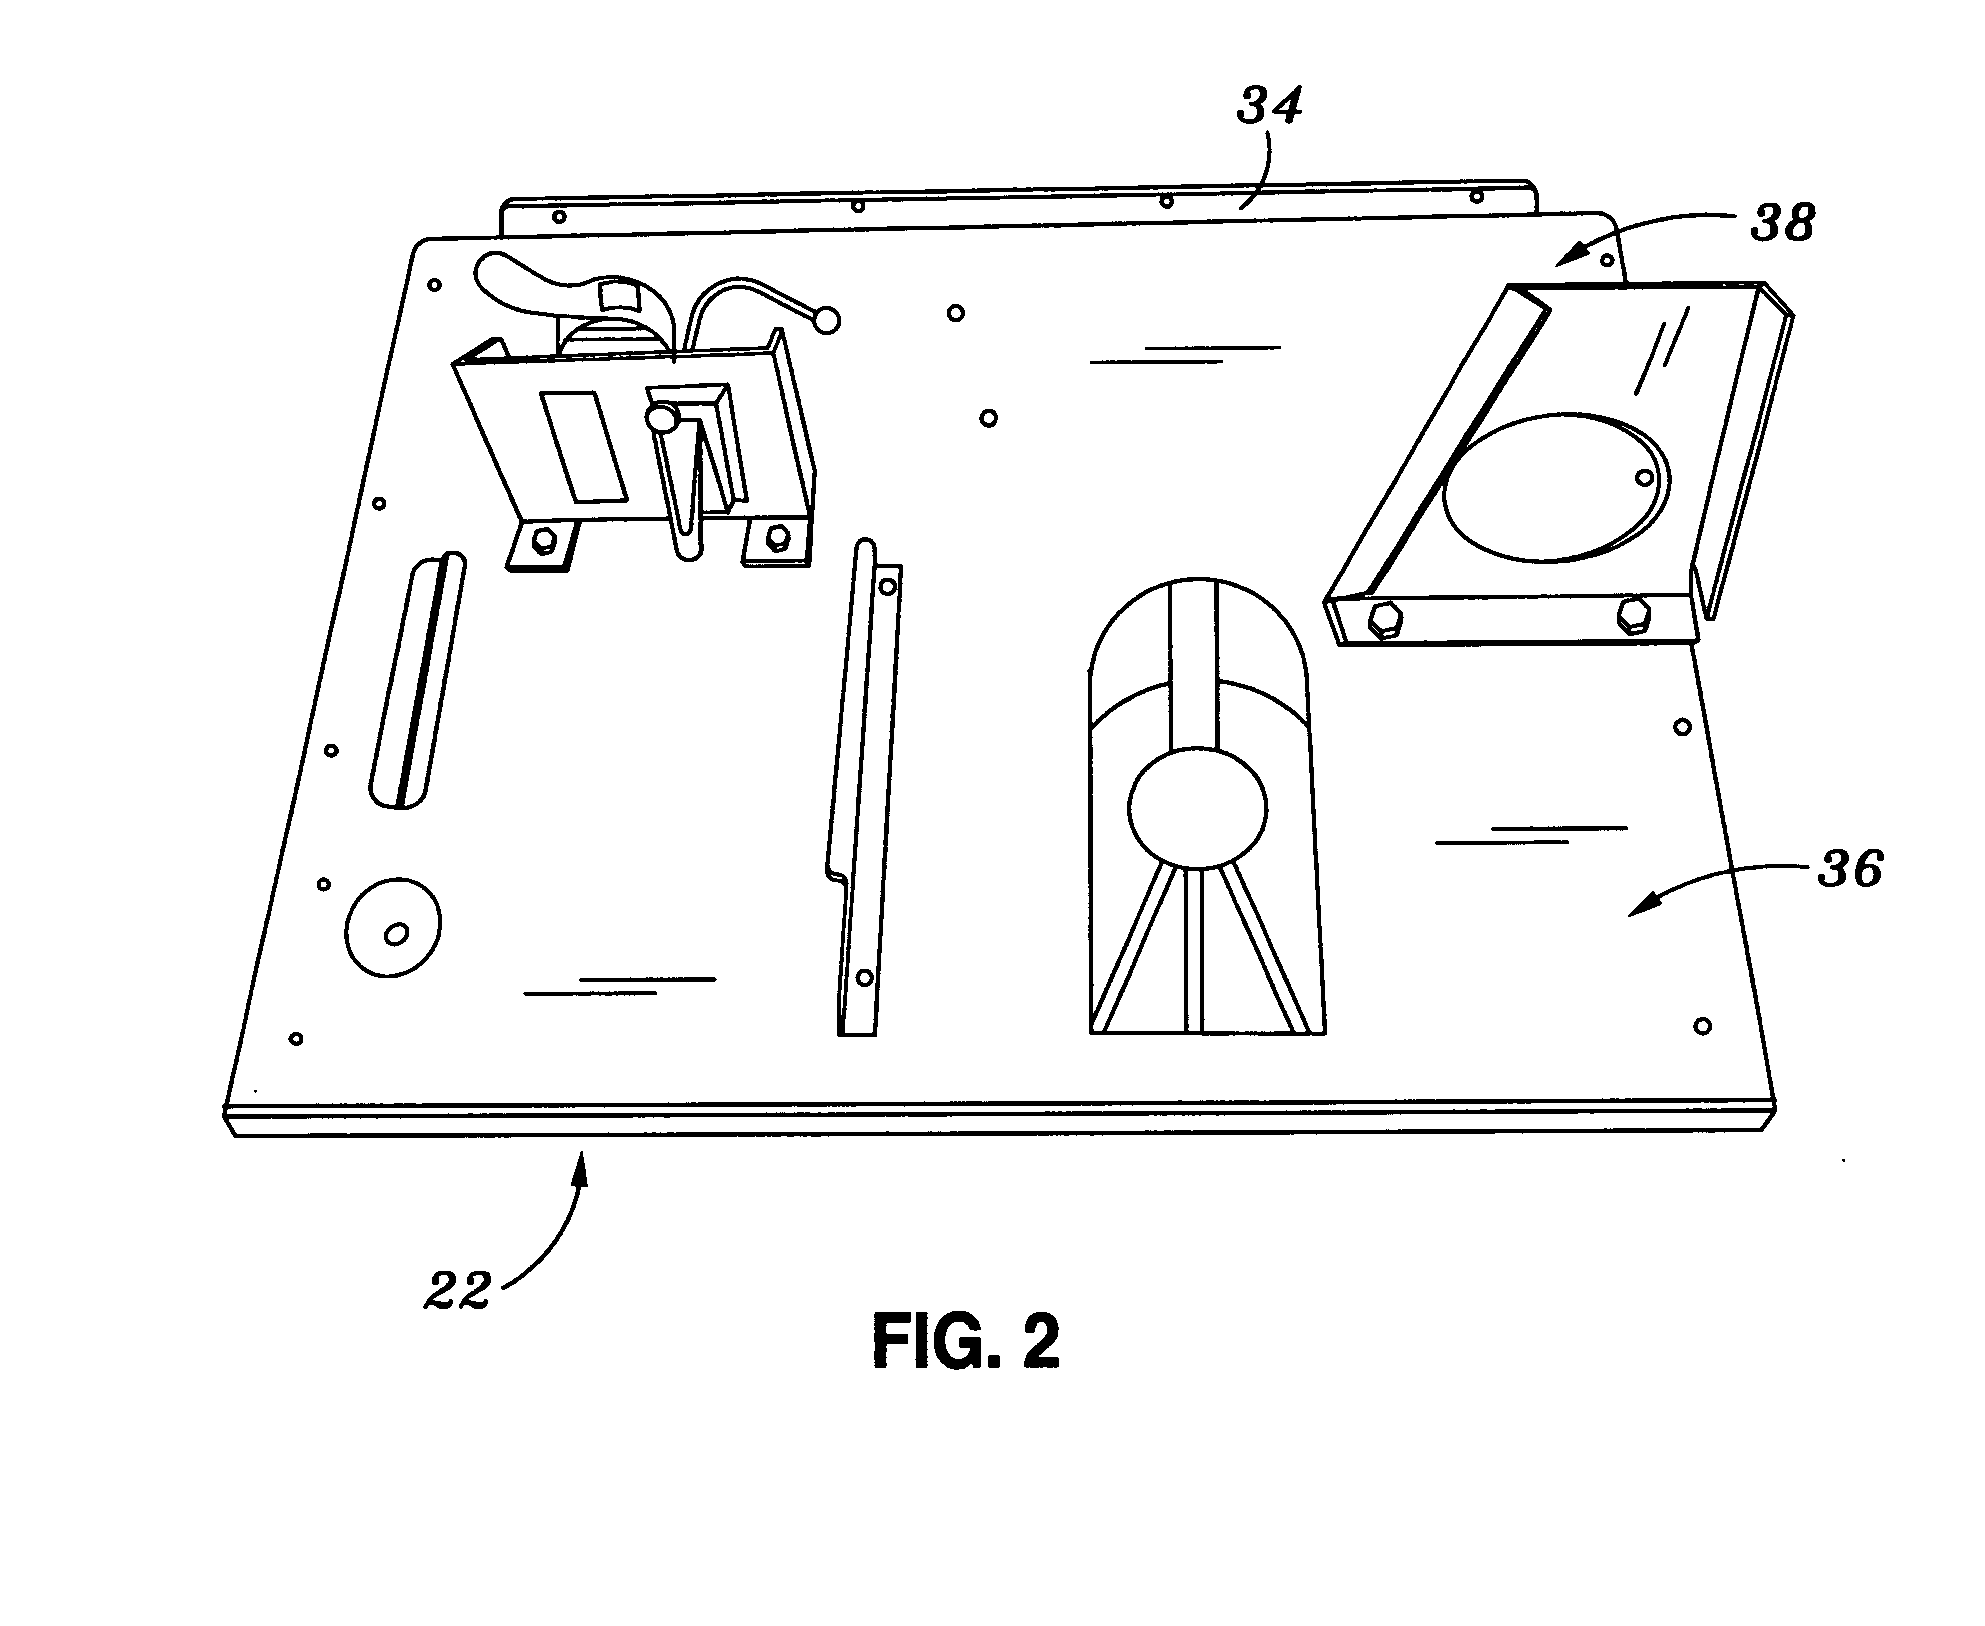 Gaming machine comprising universal presentation platform configured to accept different gaming devices